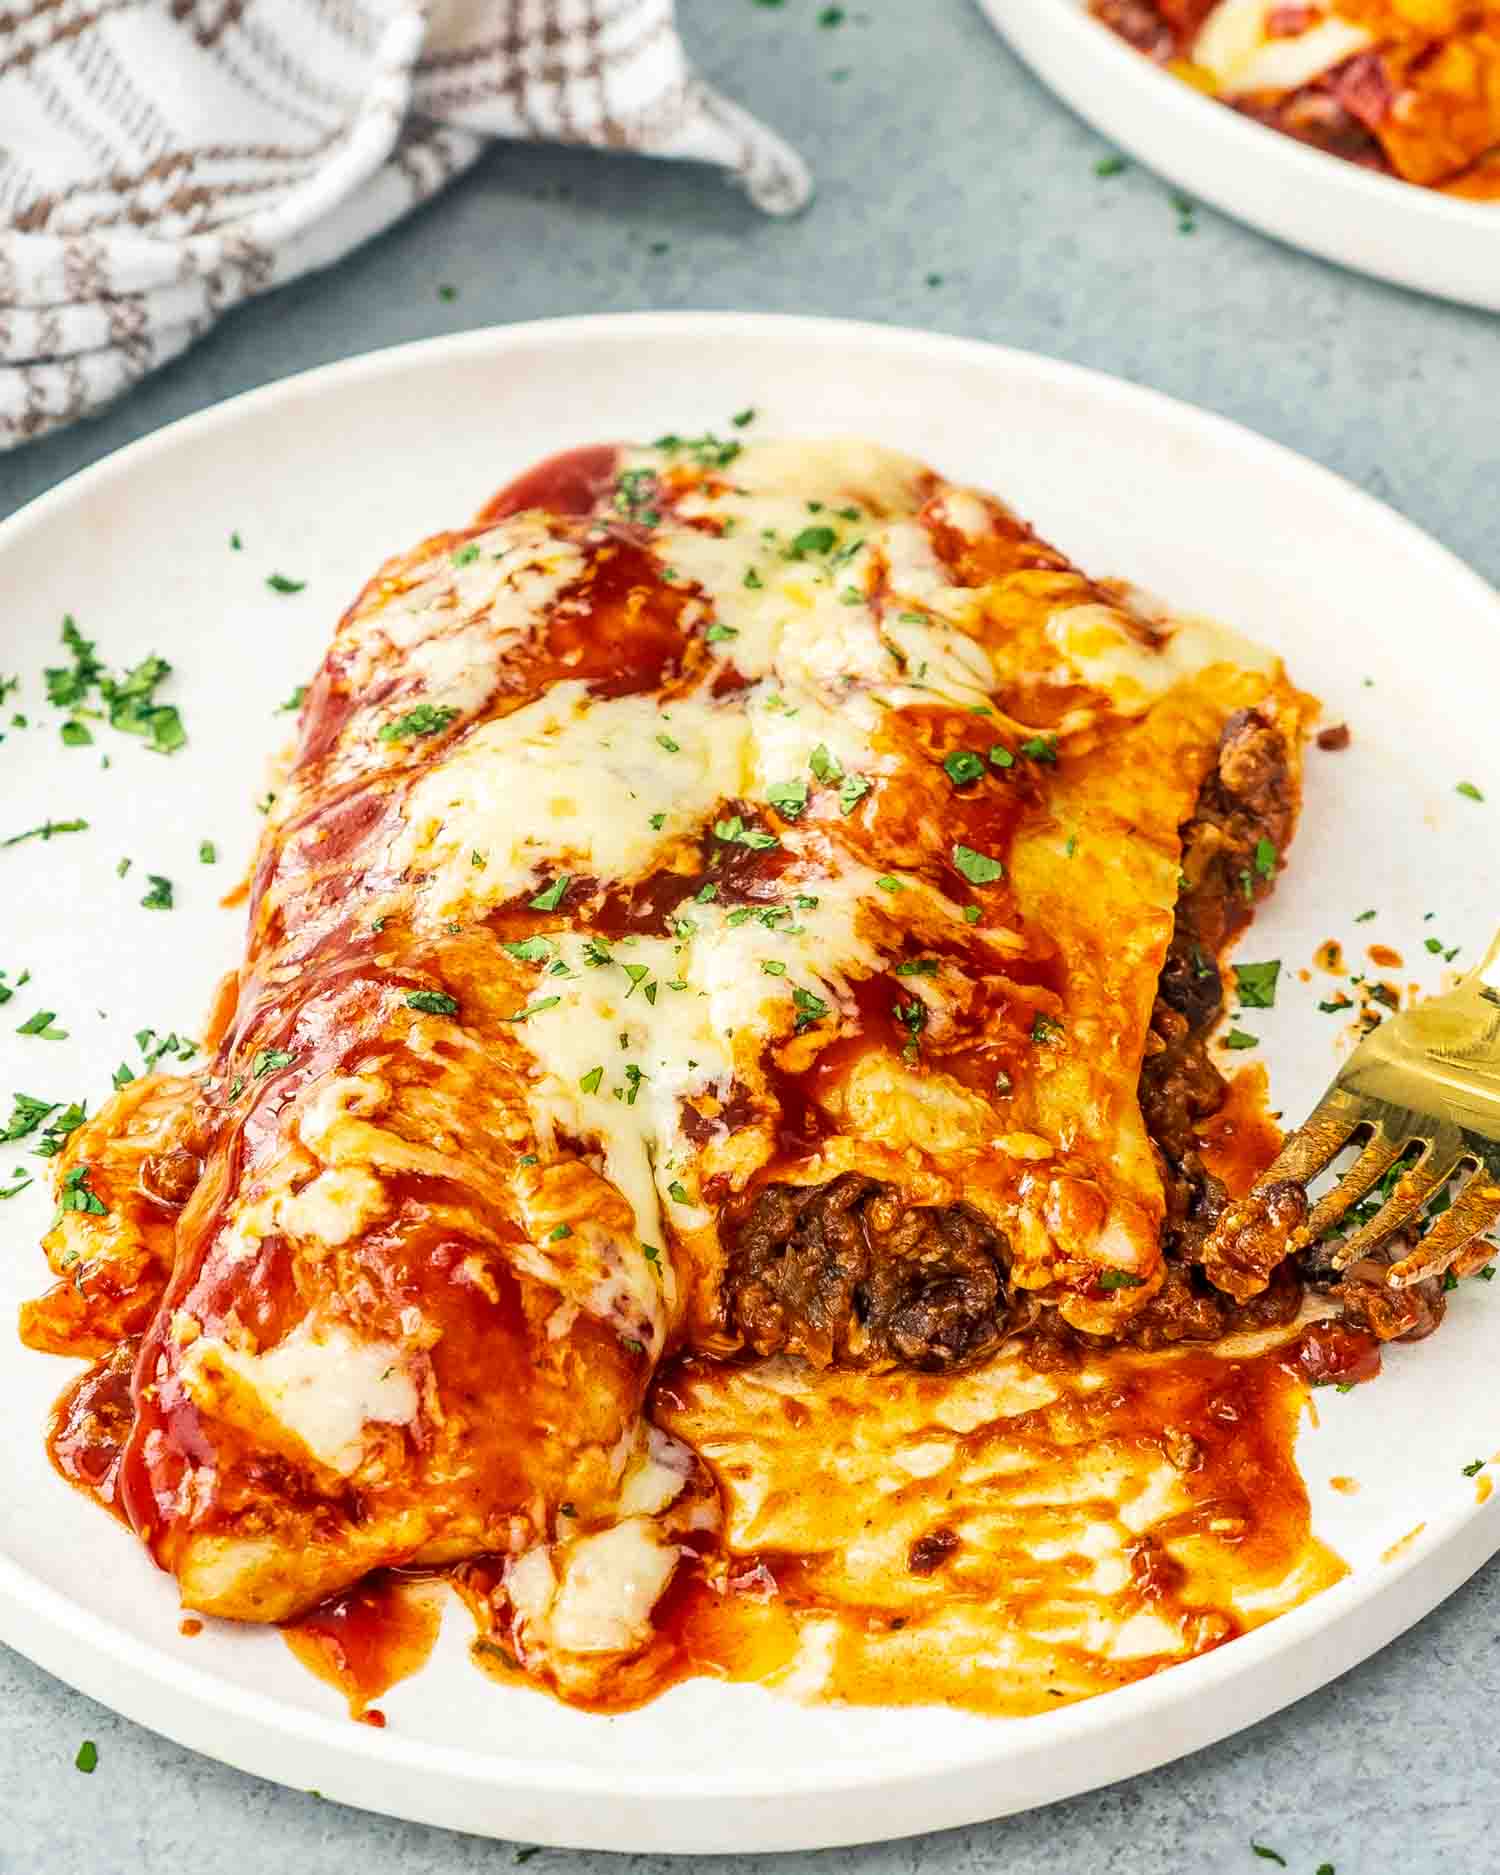 two beef enchiladas on a white plate garnished with cilantro.